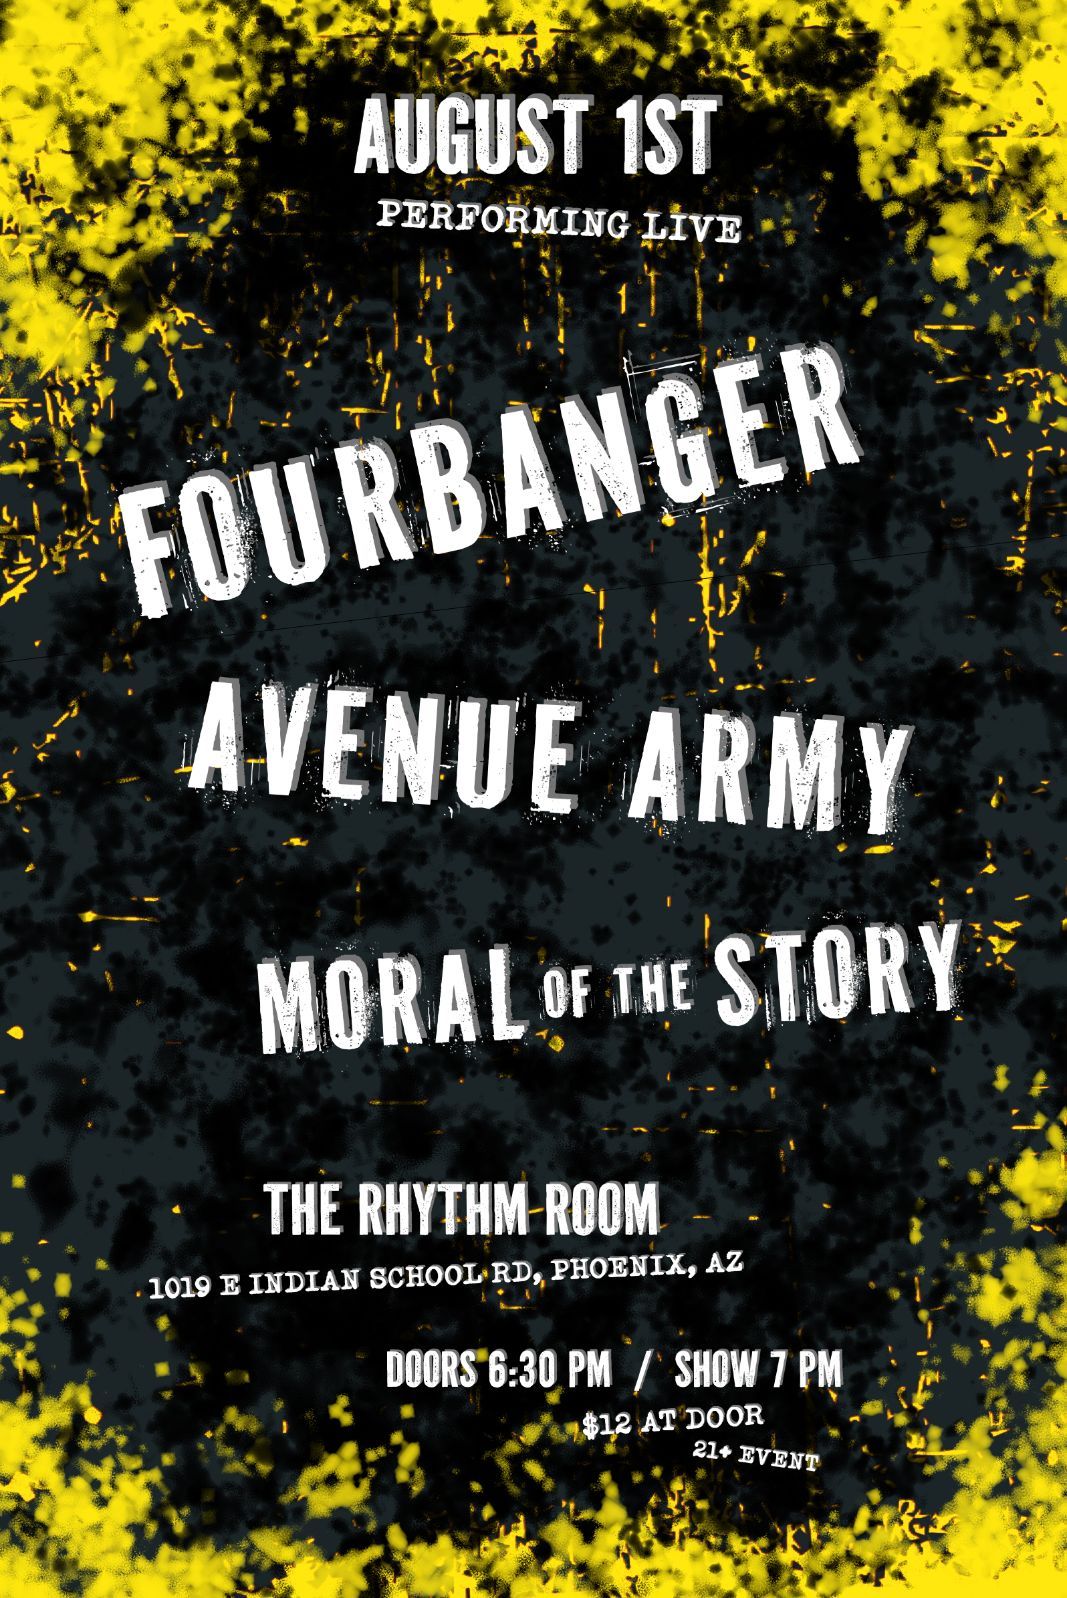 Fourbanger and Avenue Army at the Rythym Room